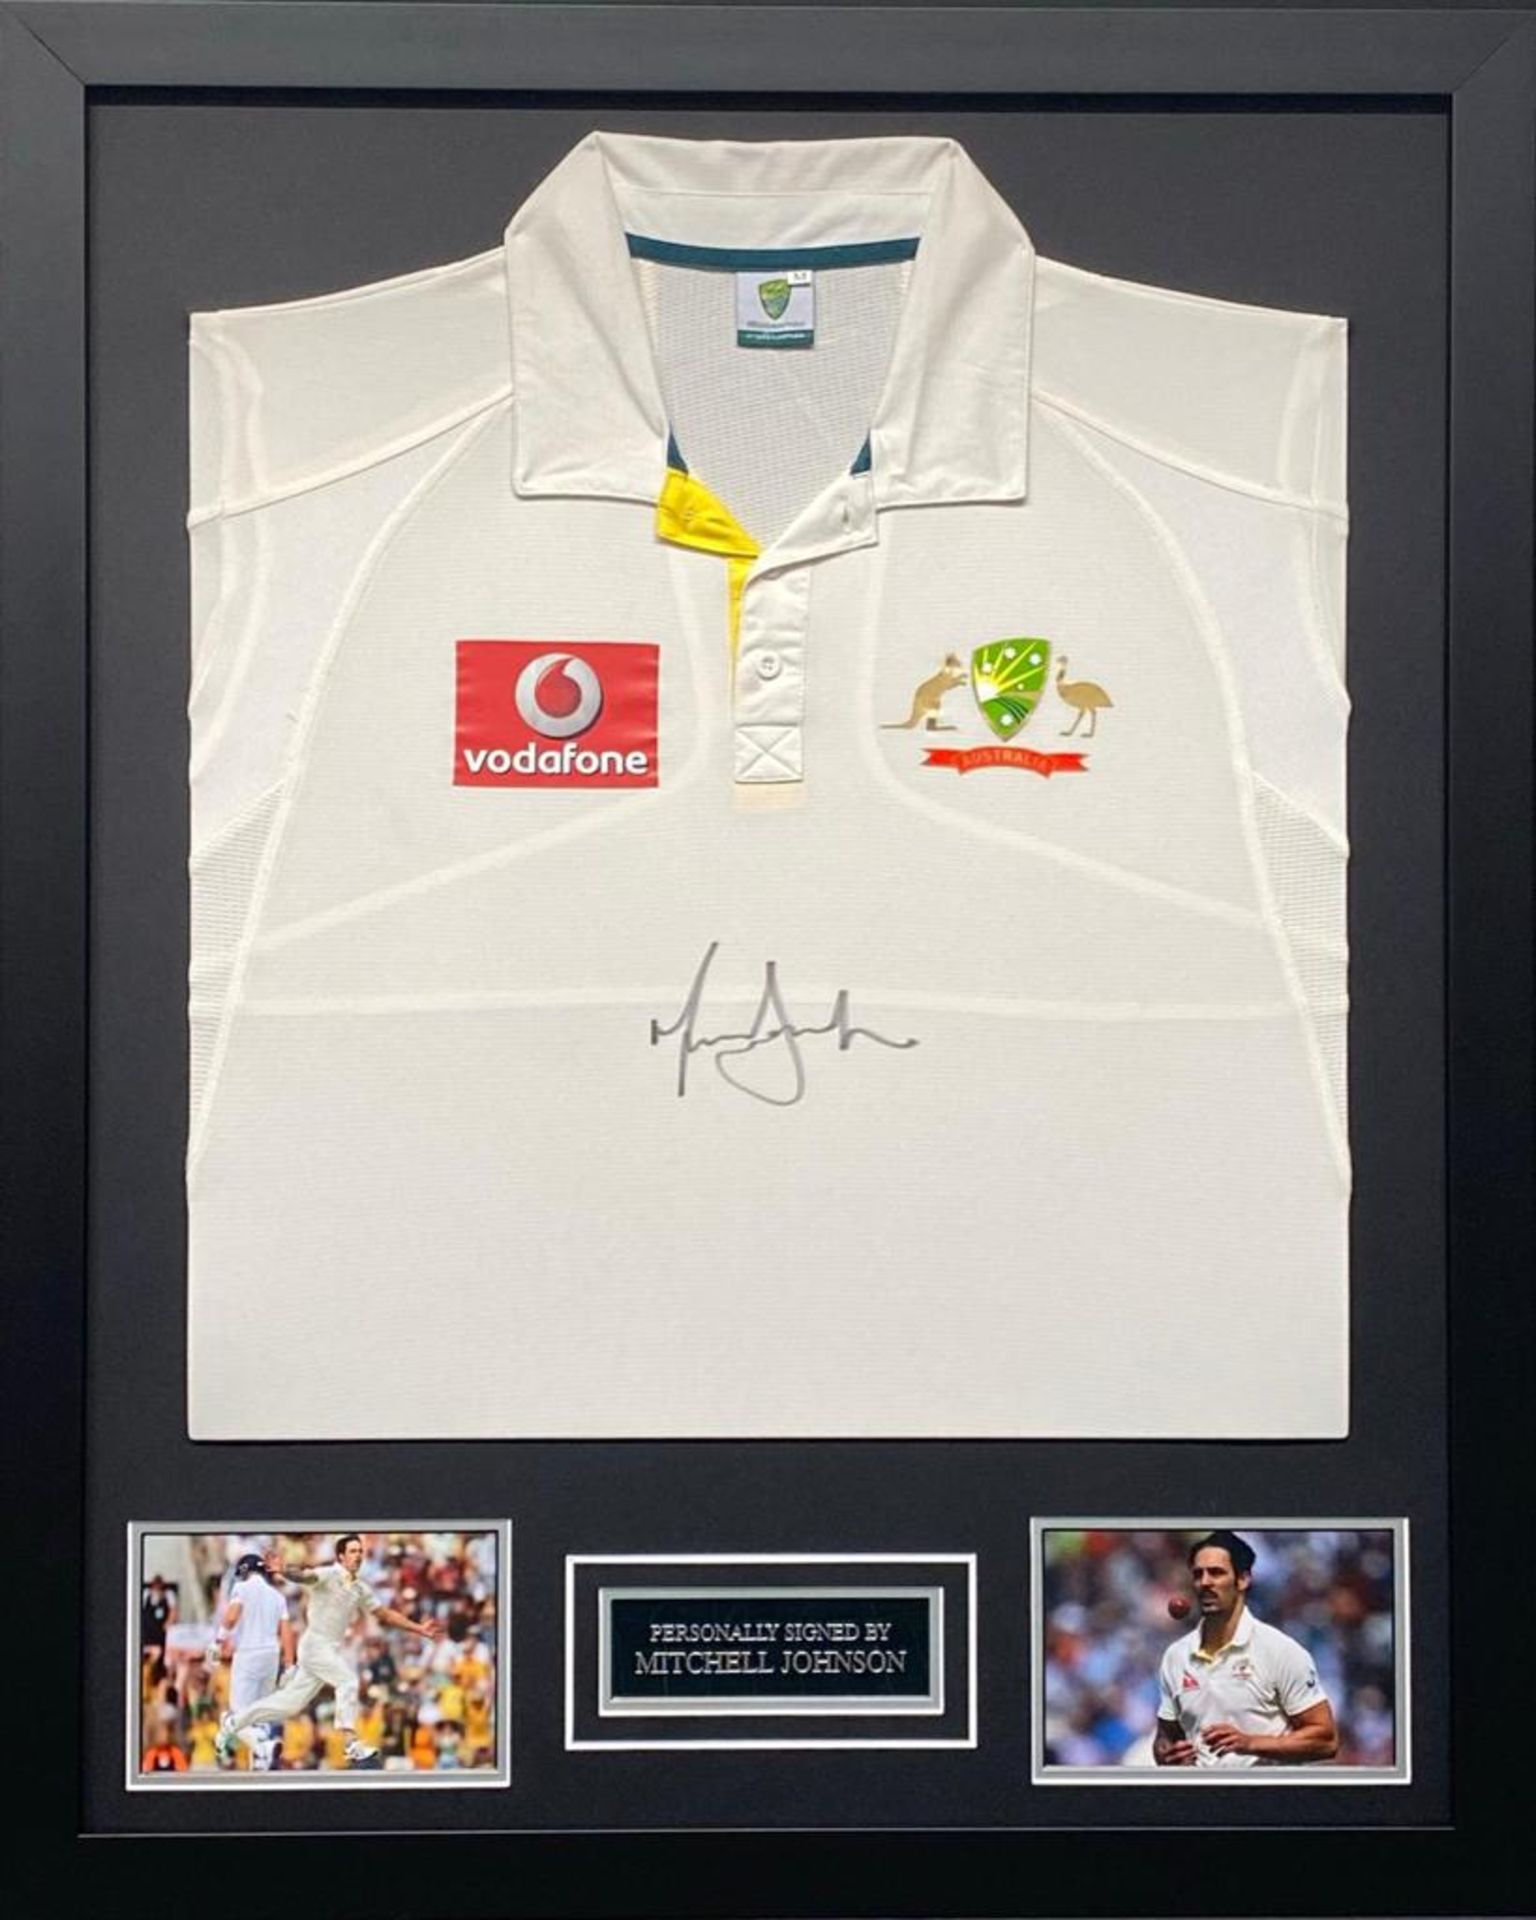 Mitchell Johnson Signed And Framed Australia Cricket Jersey Supplied with Certificate Of